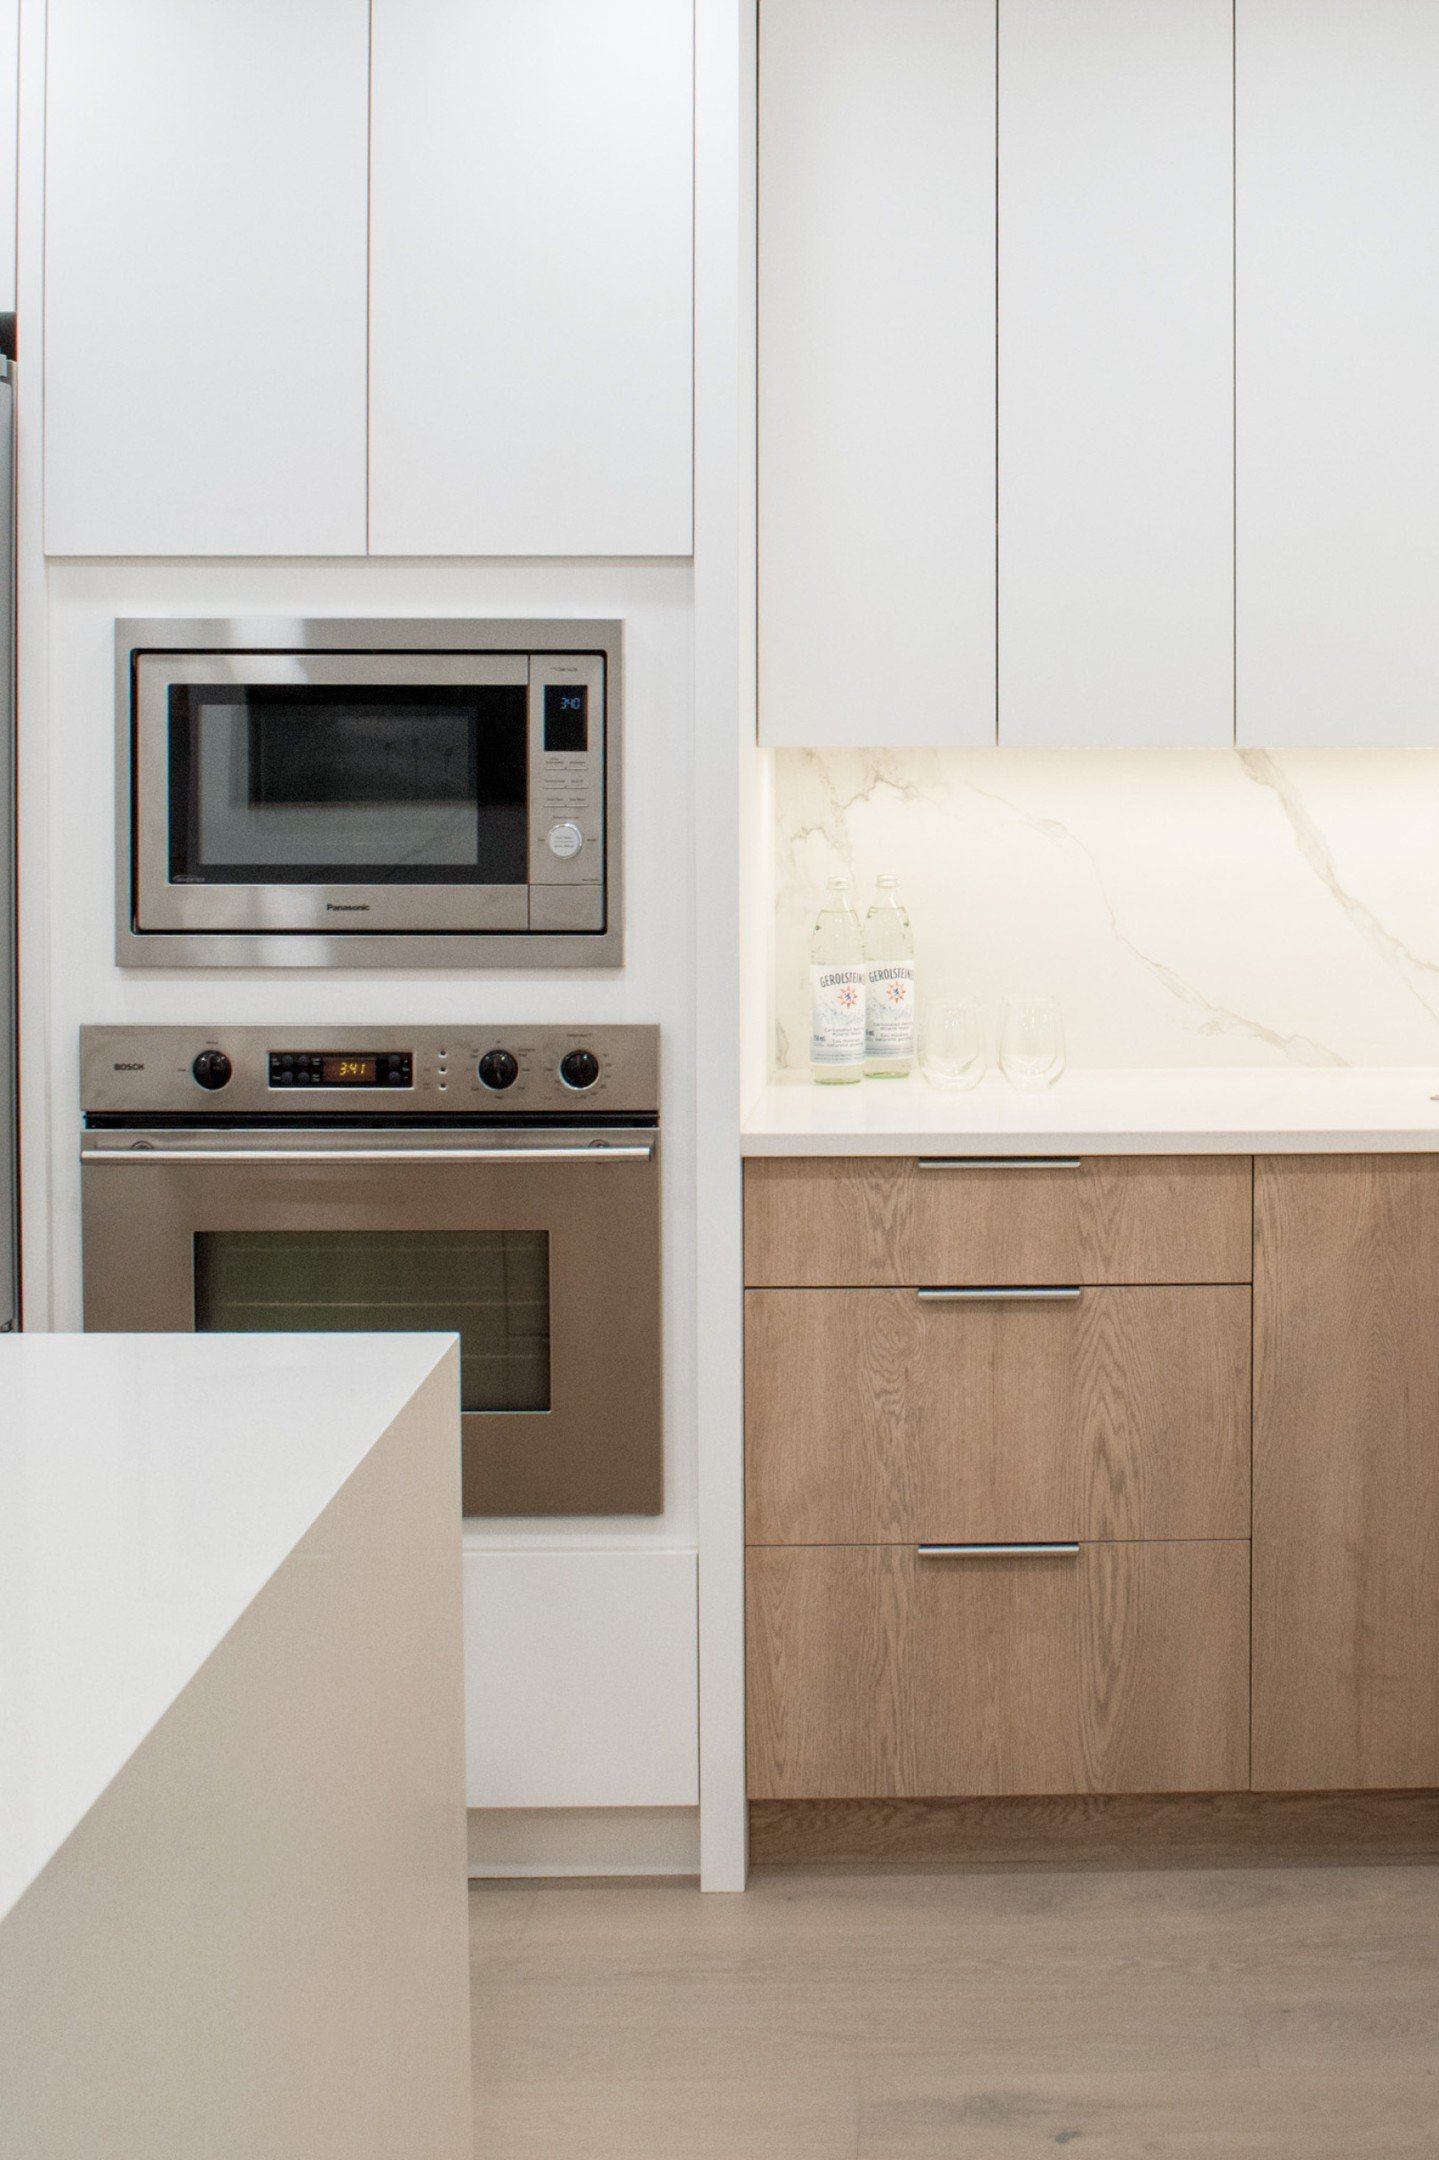 This kitchen gets a chefs kiss 👨&zwj;🍳🤌
Stacking your appliances is a great way to elevate your kitchen and use space efficiently!
.
.
.
.
.
.
#interiordesign #homestyle #interiorstyling #homedesign #kitchen #island #custom #decor #wood #white #mo